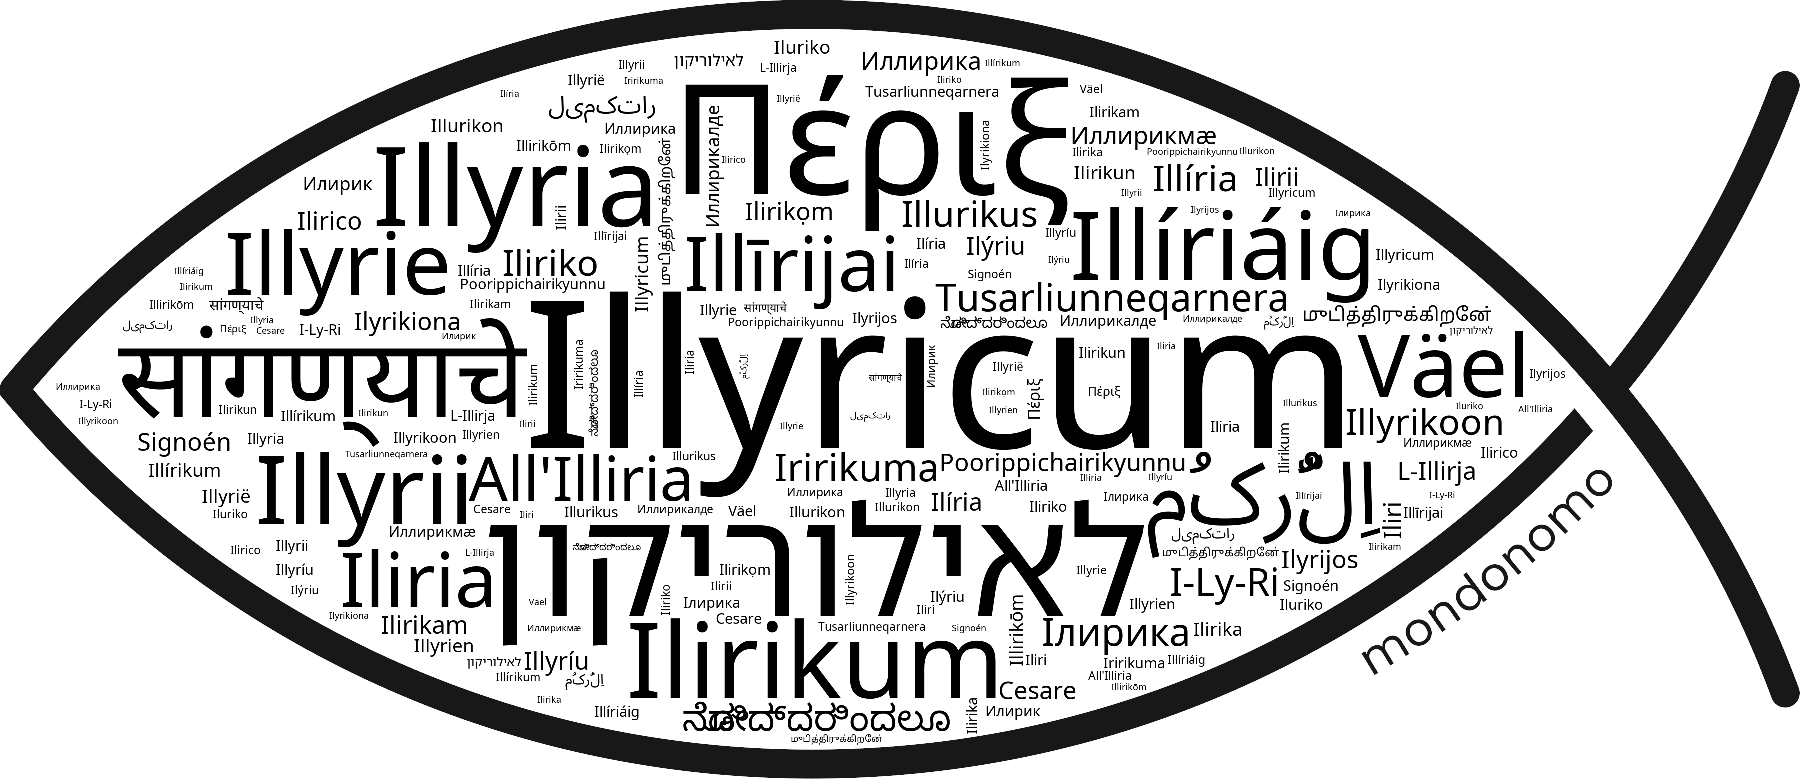 Name Illyricum in the world's Bibles